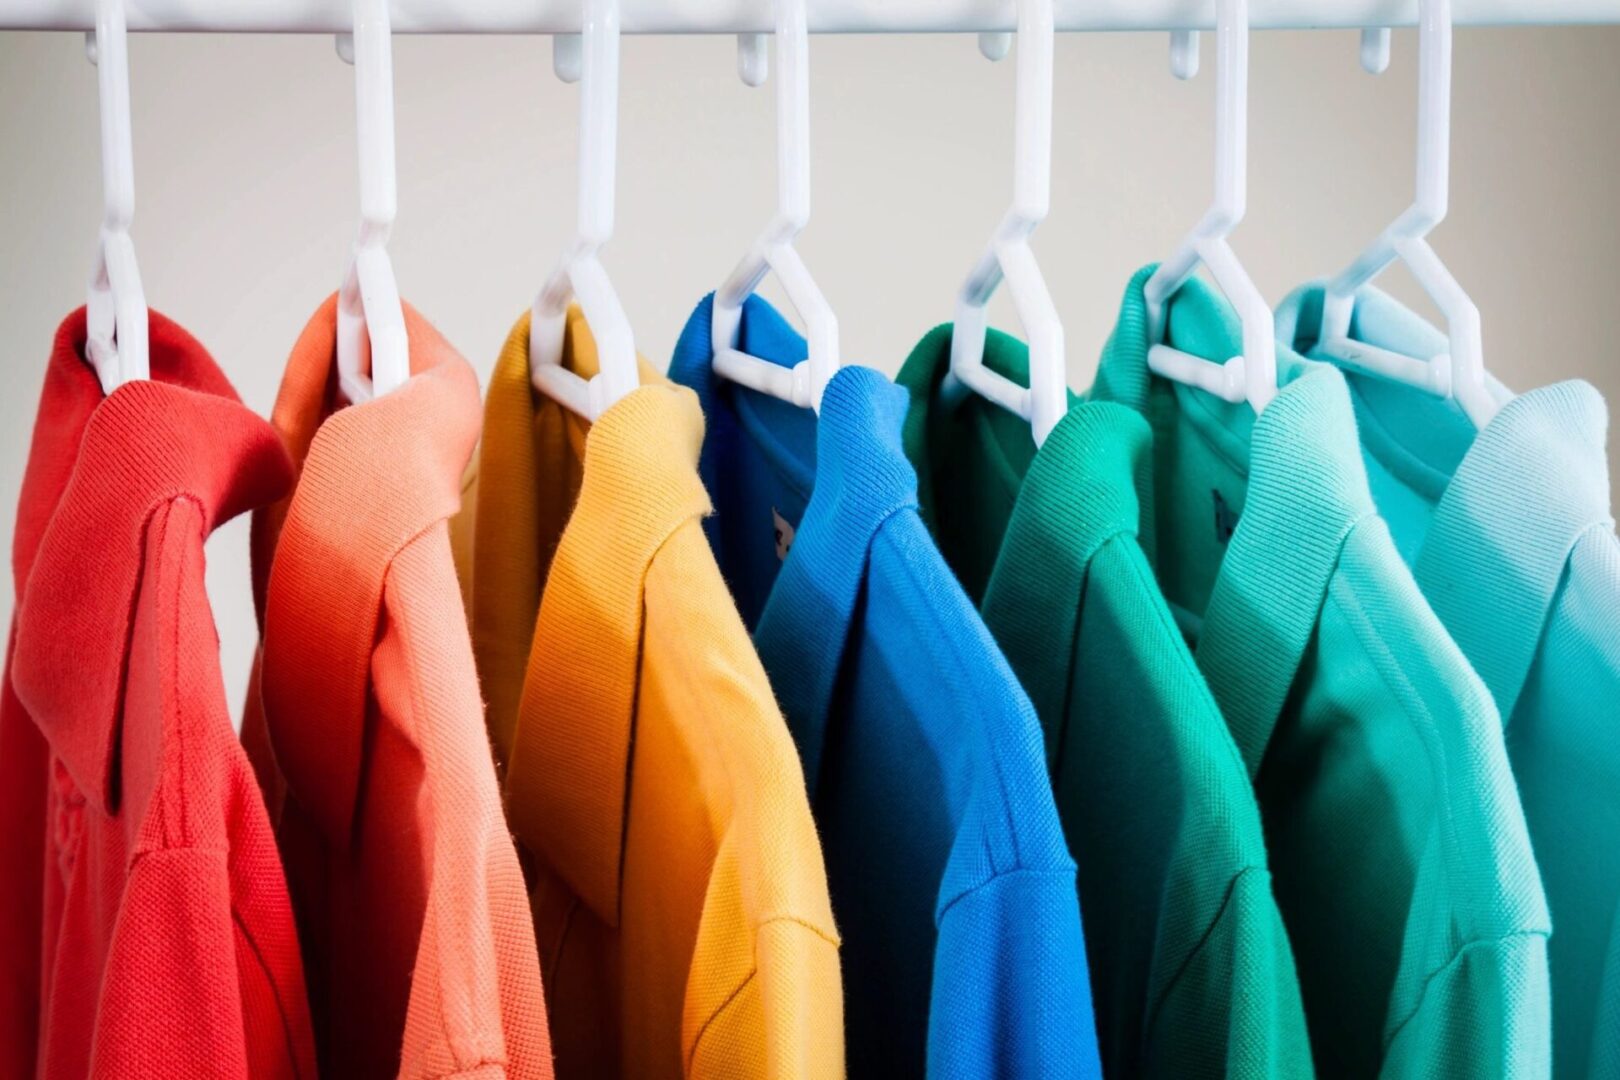 A row of jackets hanging on white hangers.